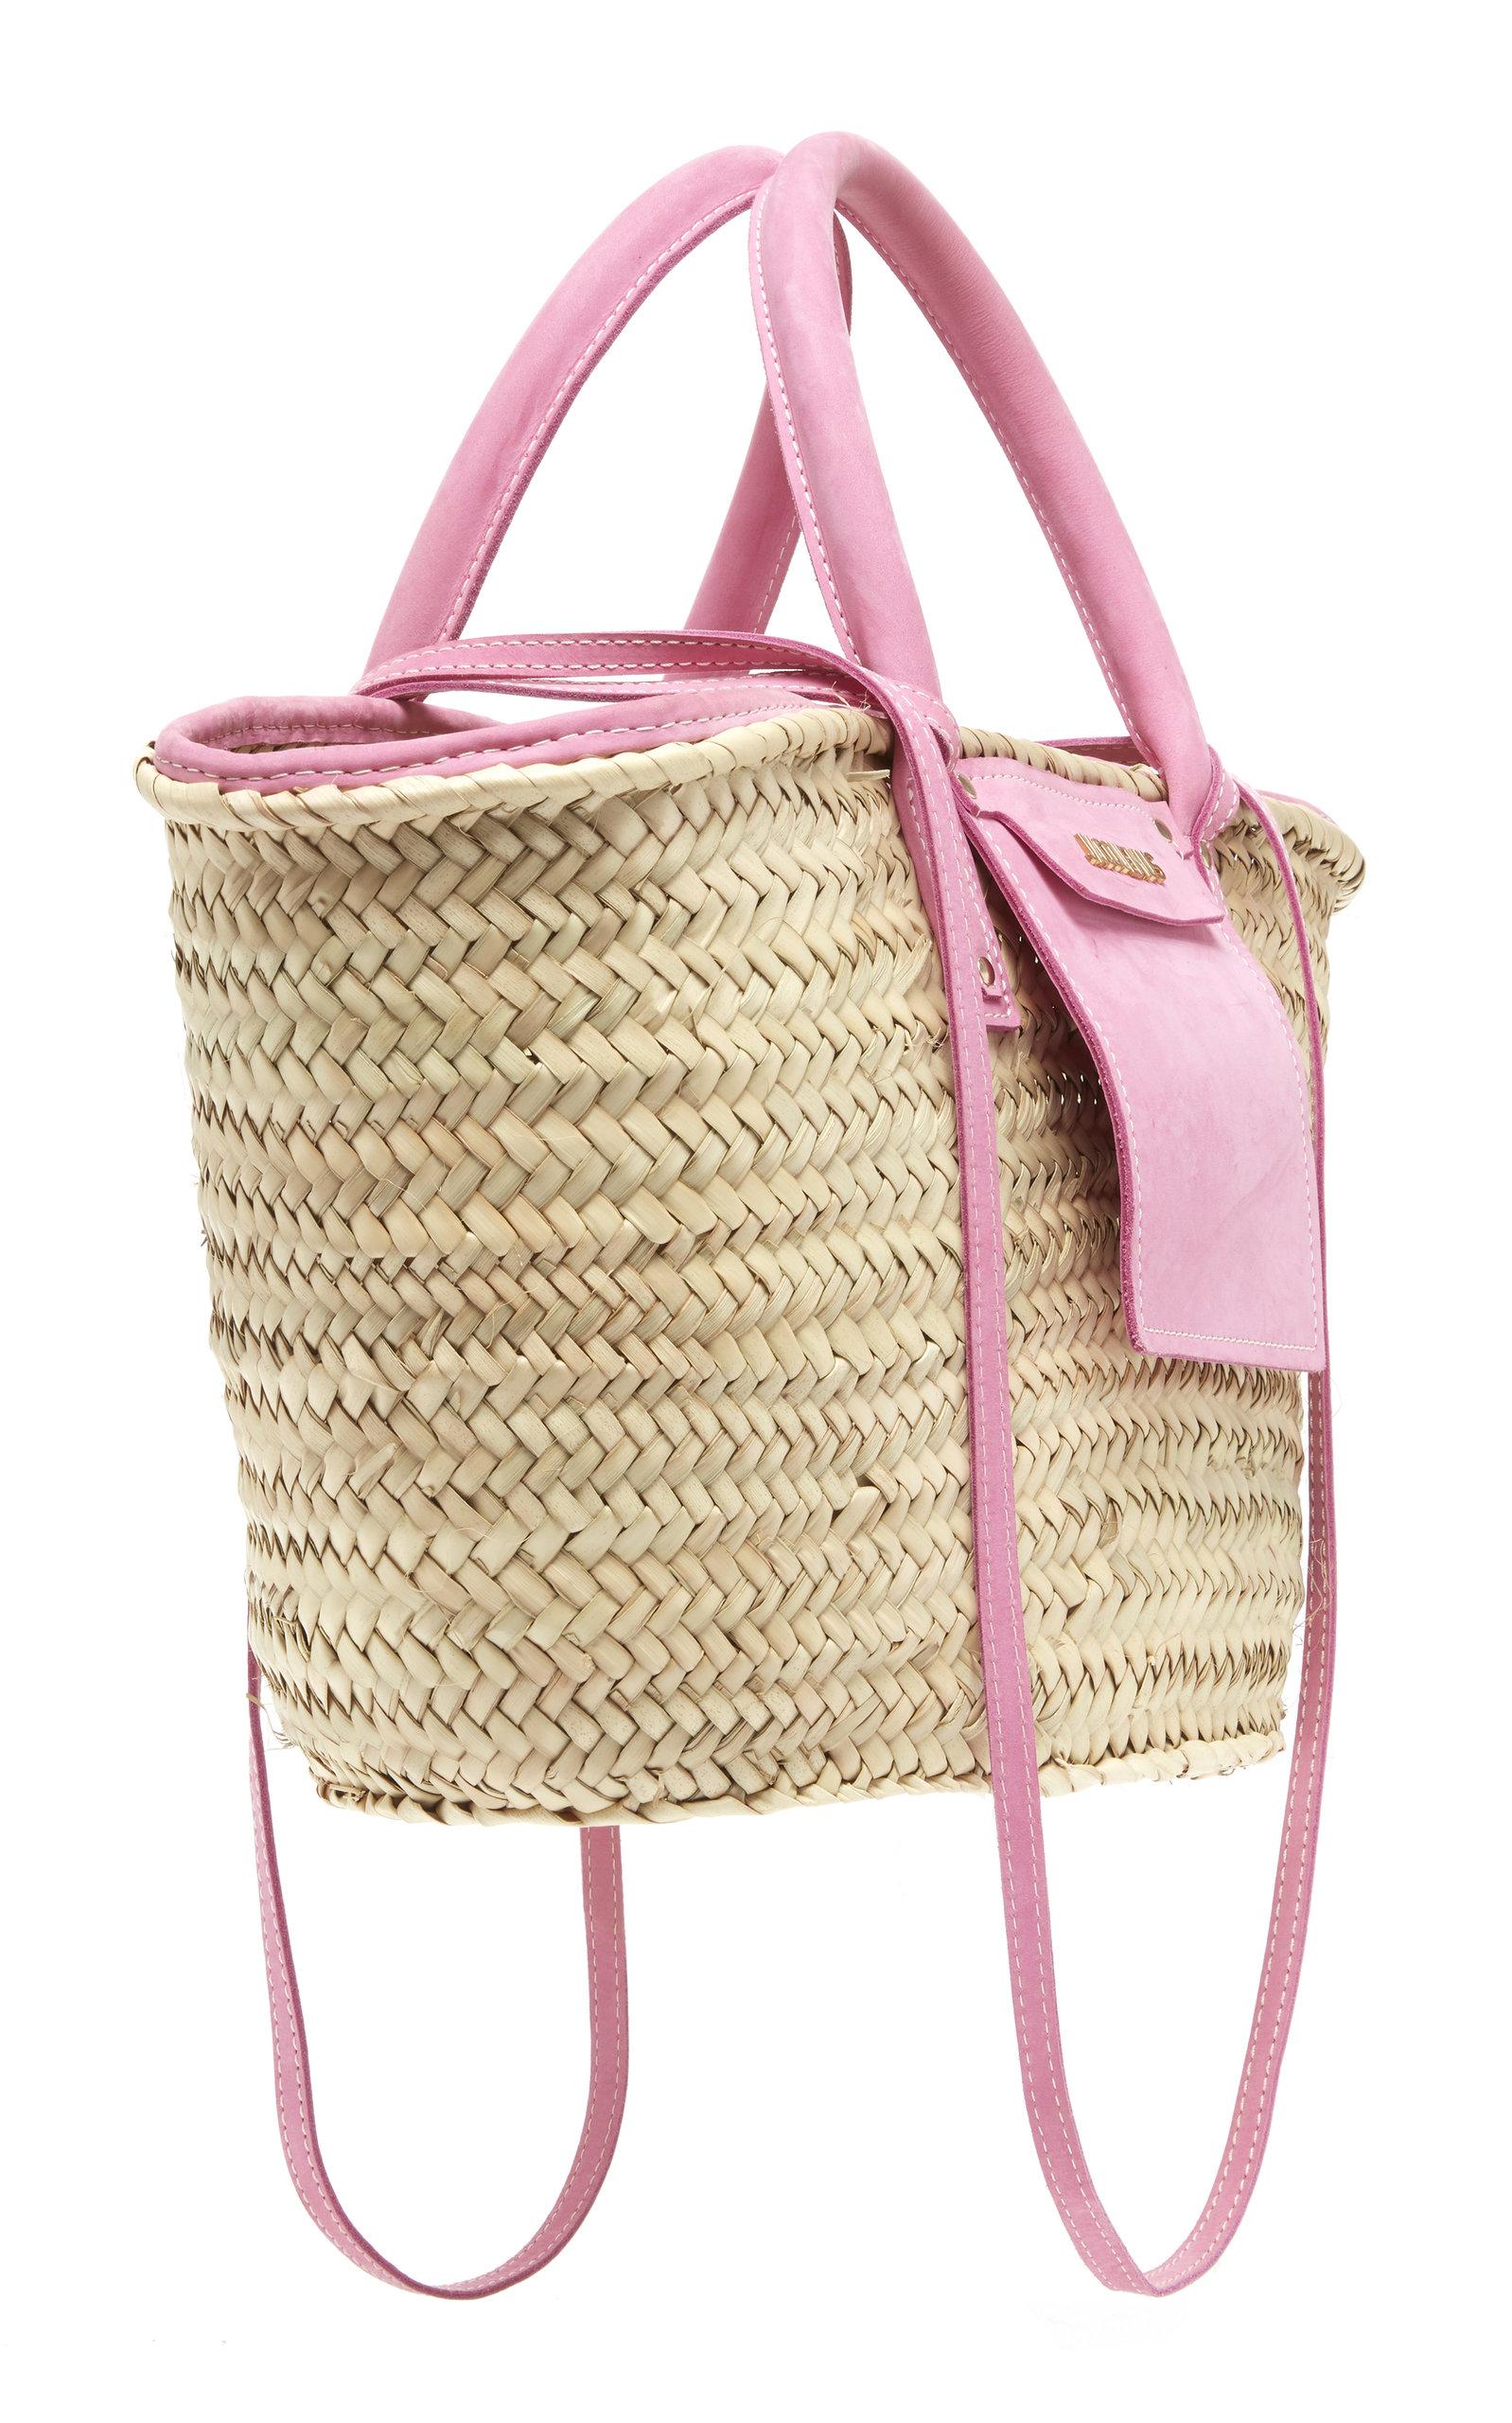 Jacquemus Le Panier Soleil Suede-trimmed Straw Tote in Pink - Lyst